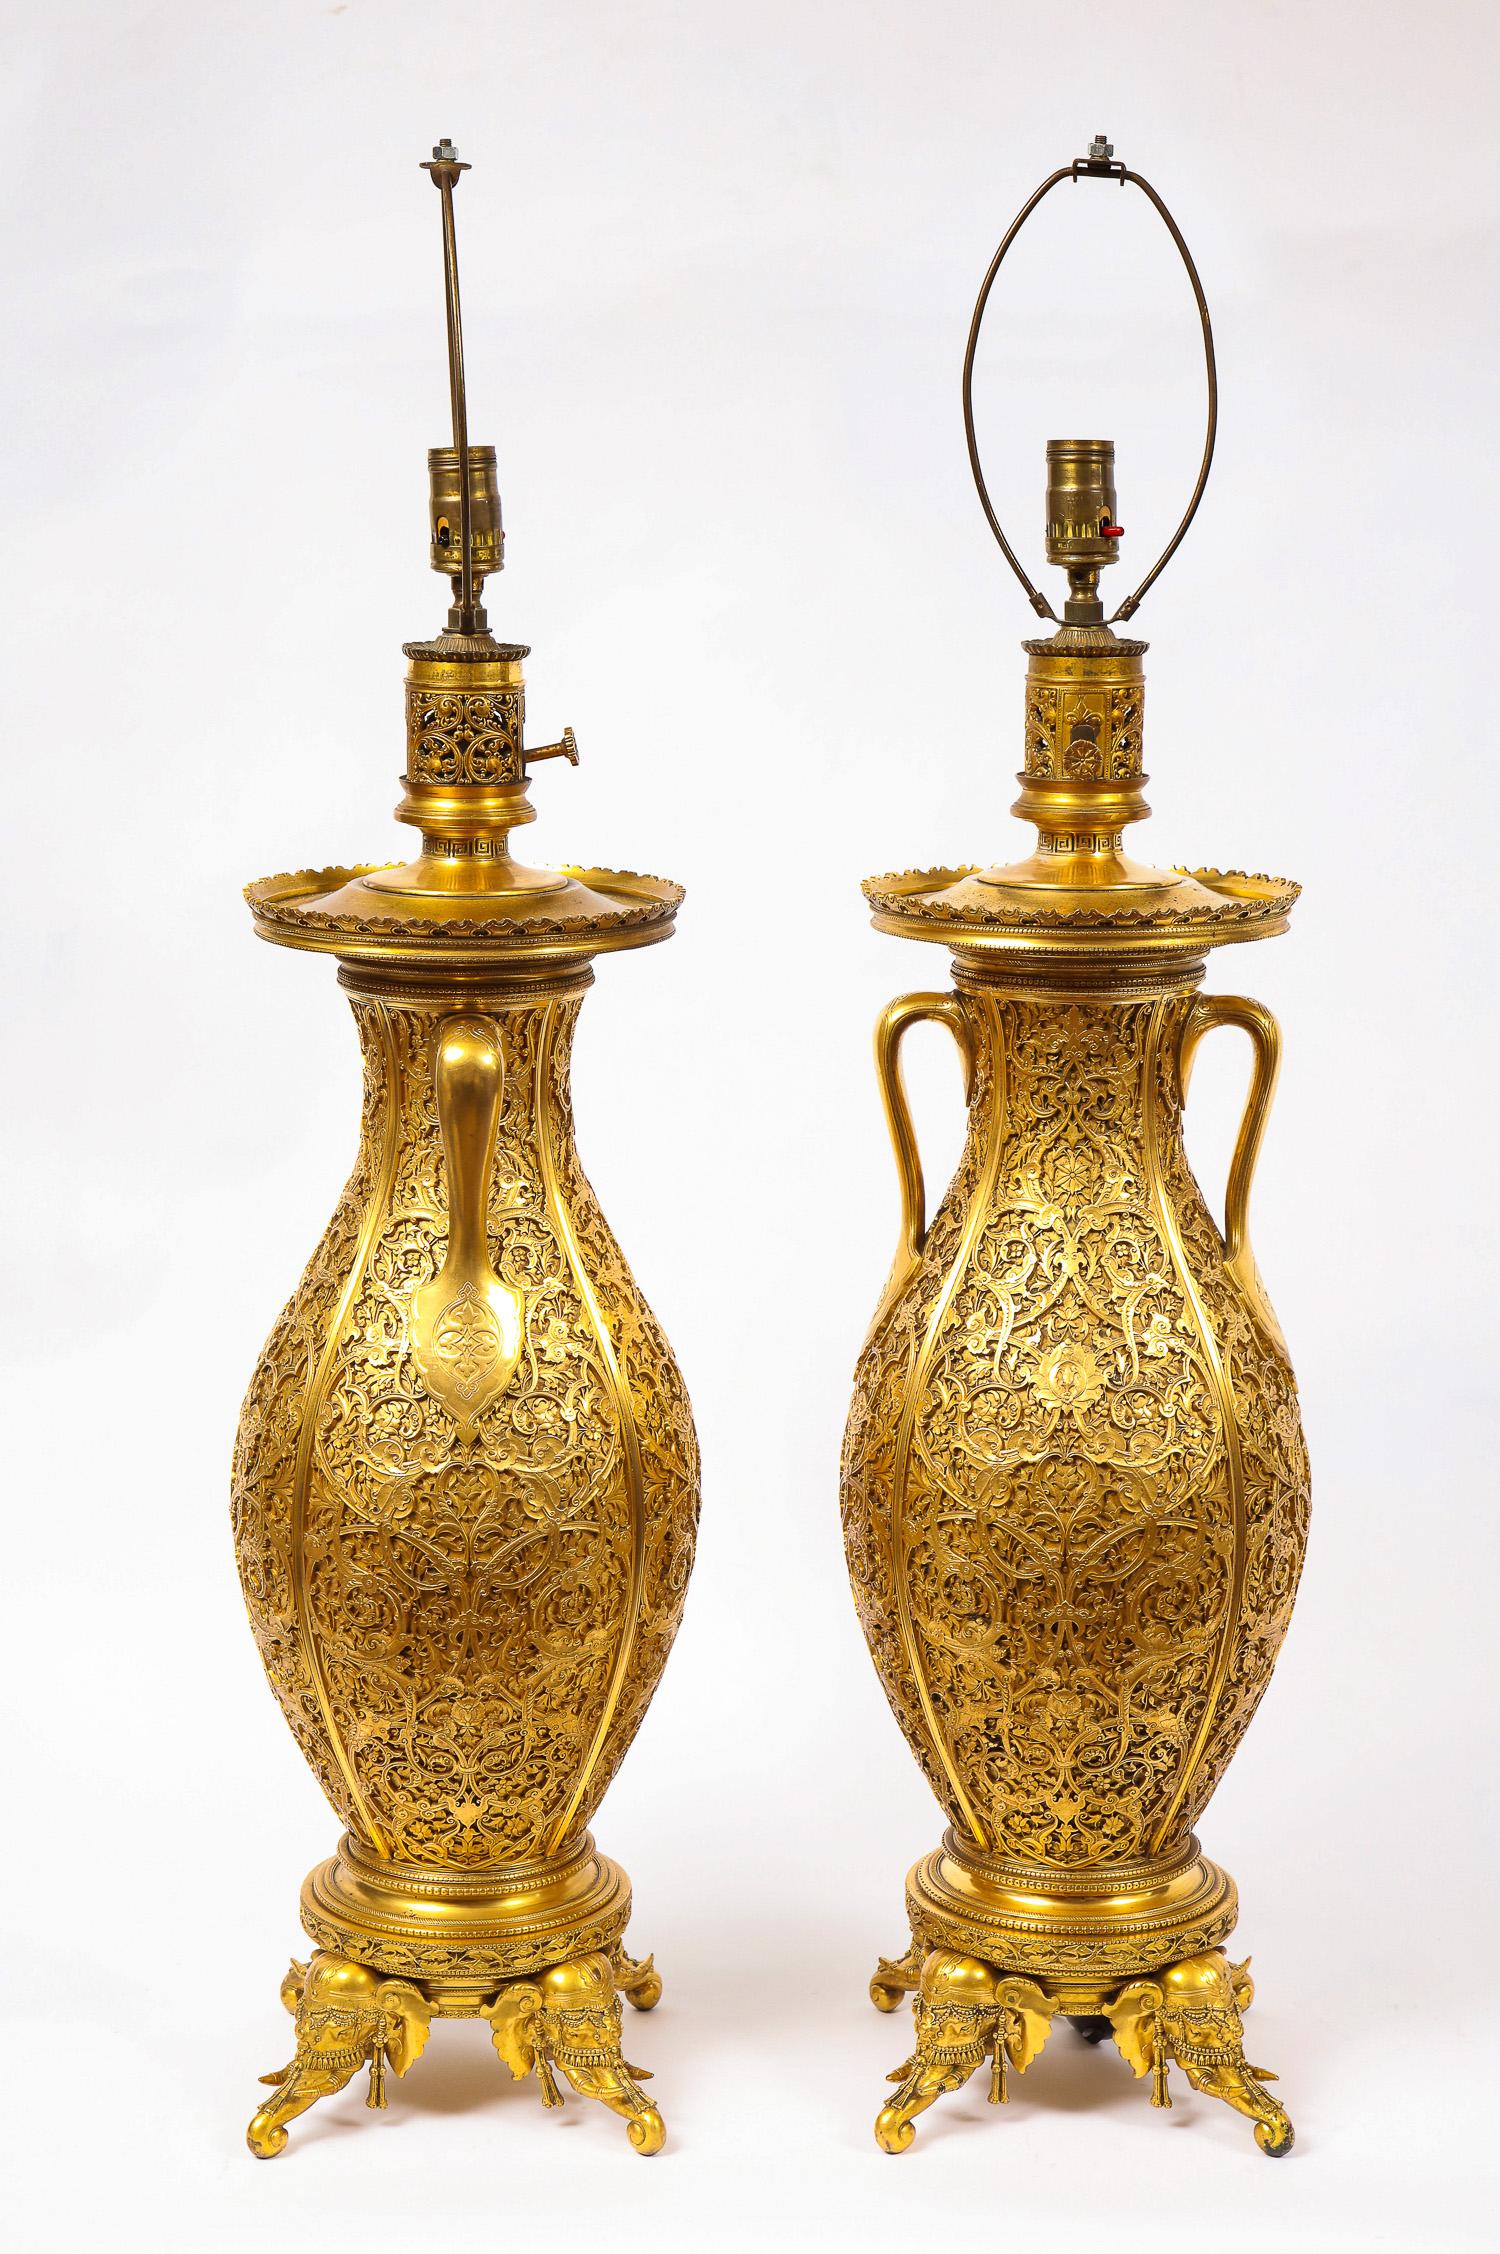 Pair of French Japonisme Ormolu Vases E. Lièvre, Executed by F. Barbedienne For Sale 5